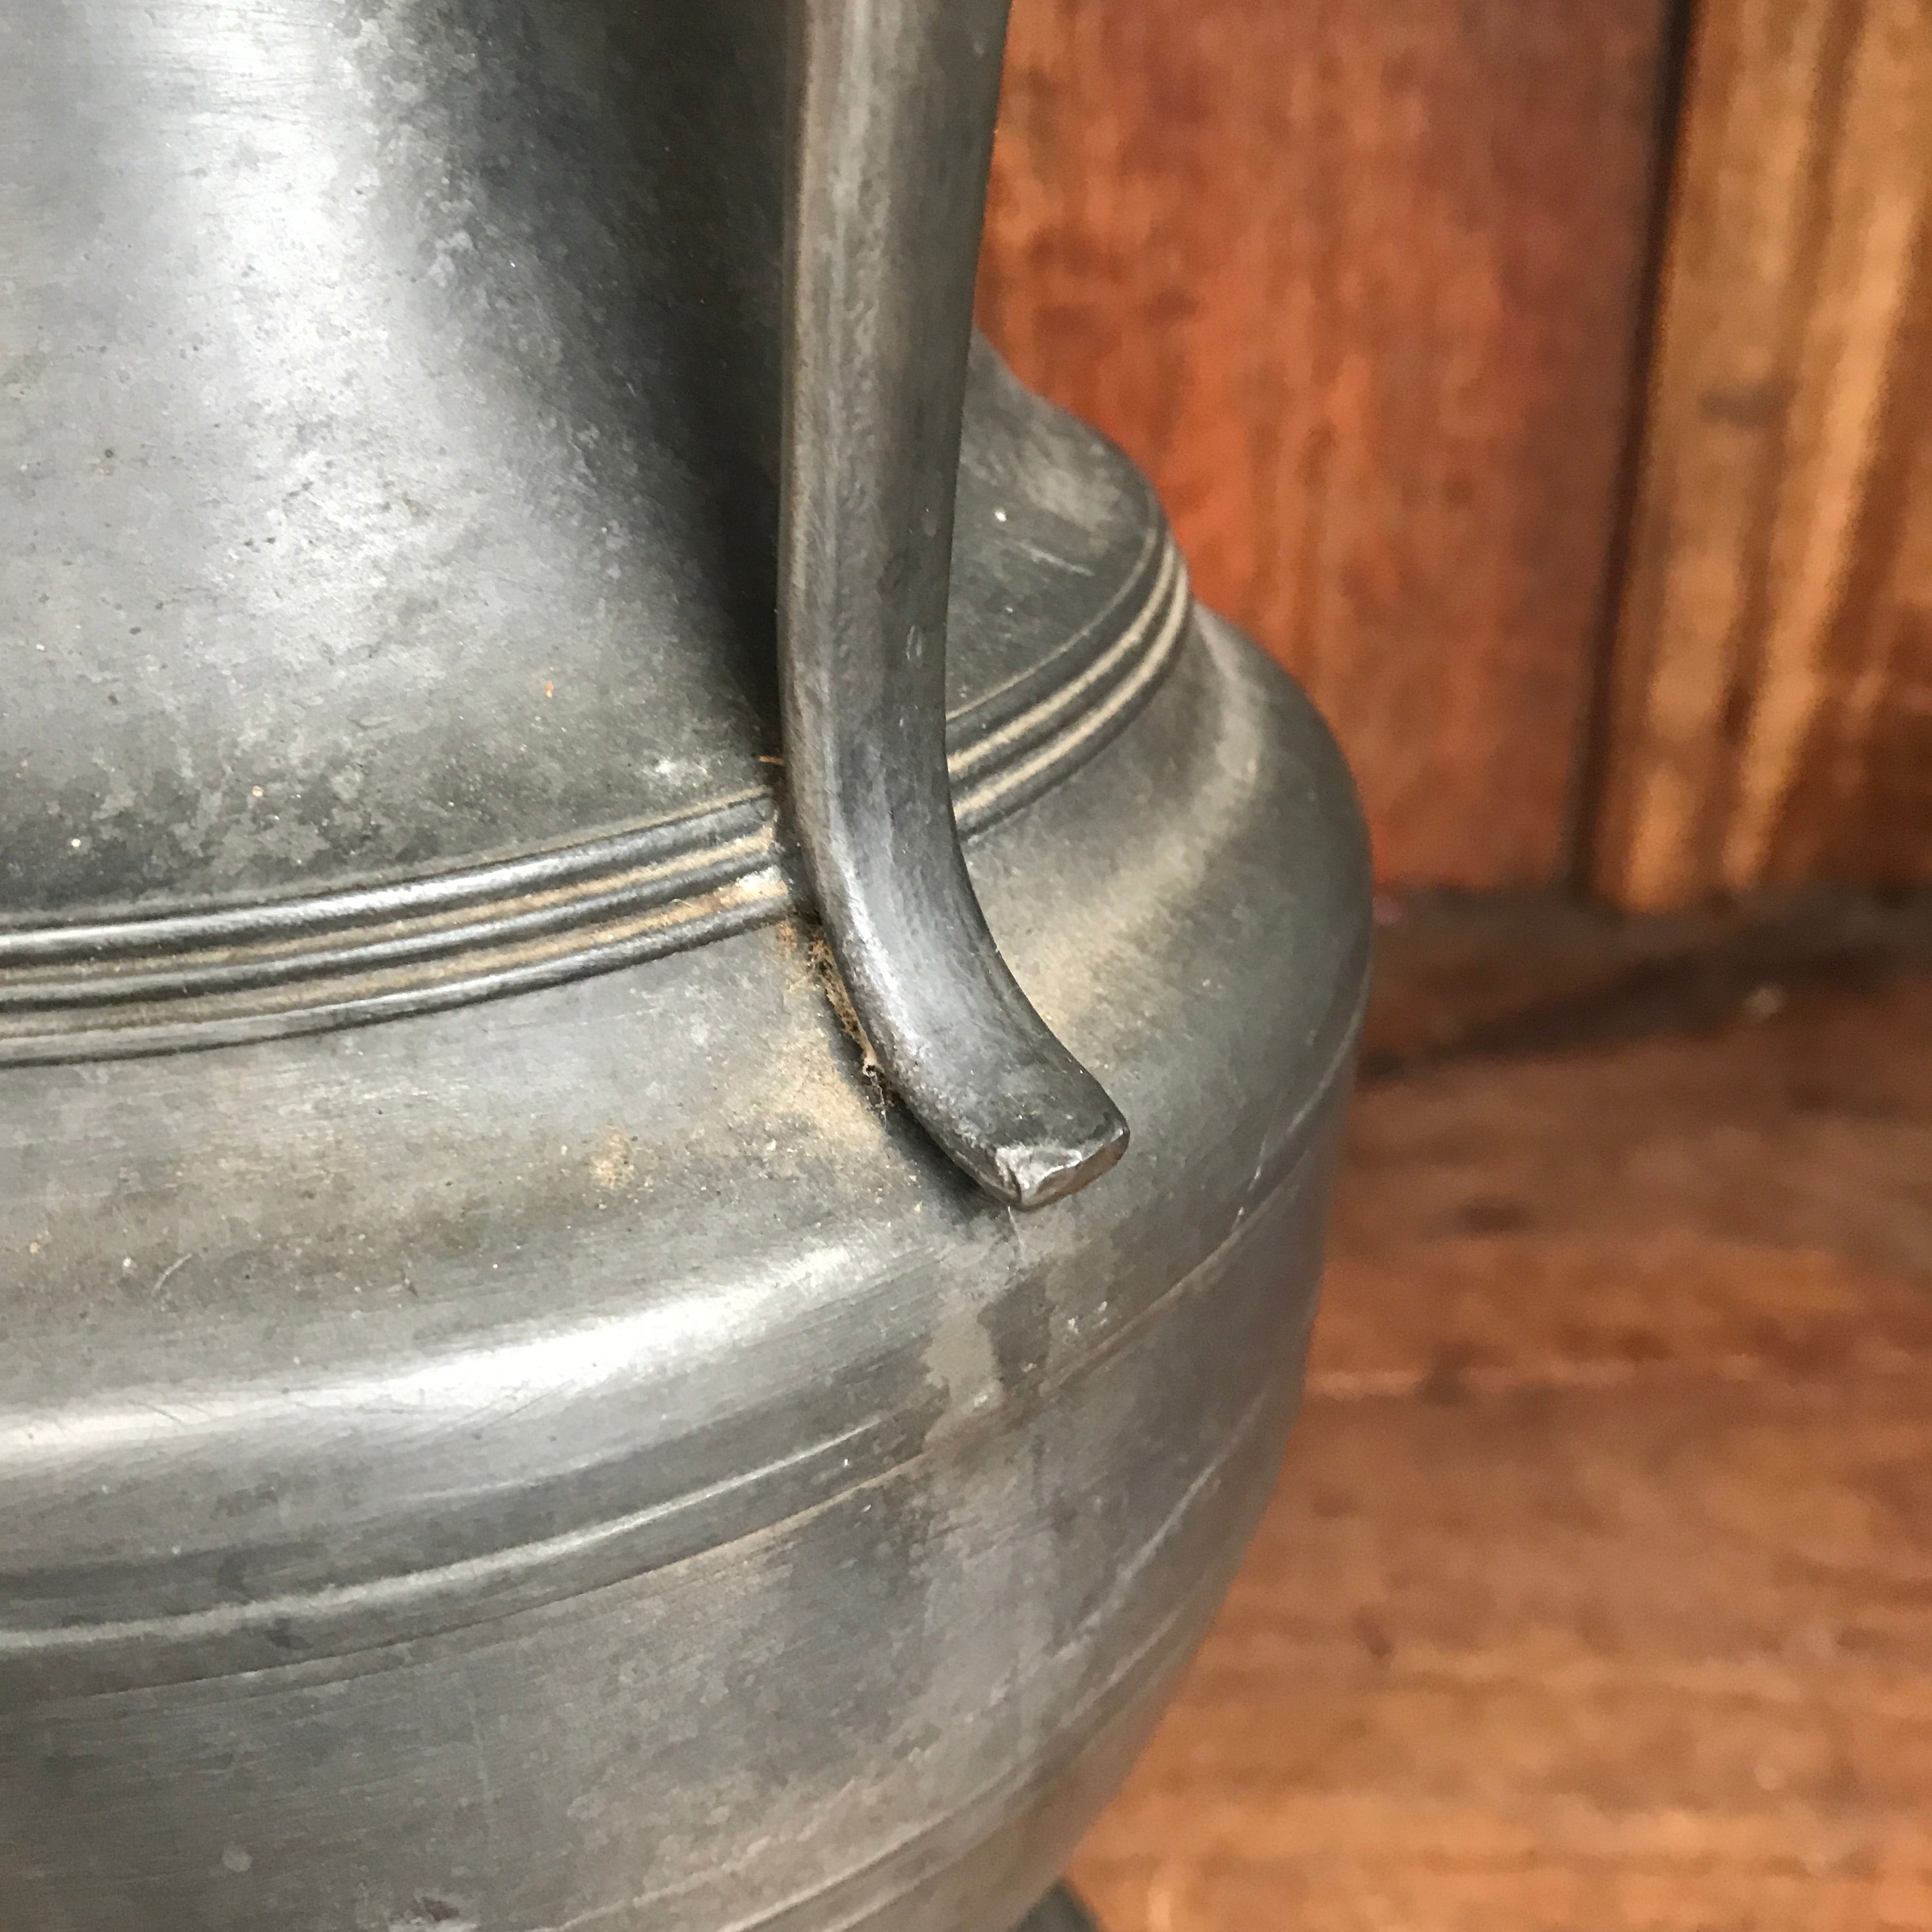 Large French Vintage Pewter Pitcher